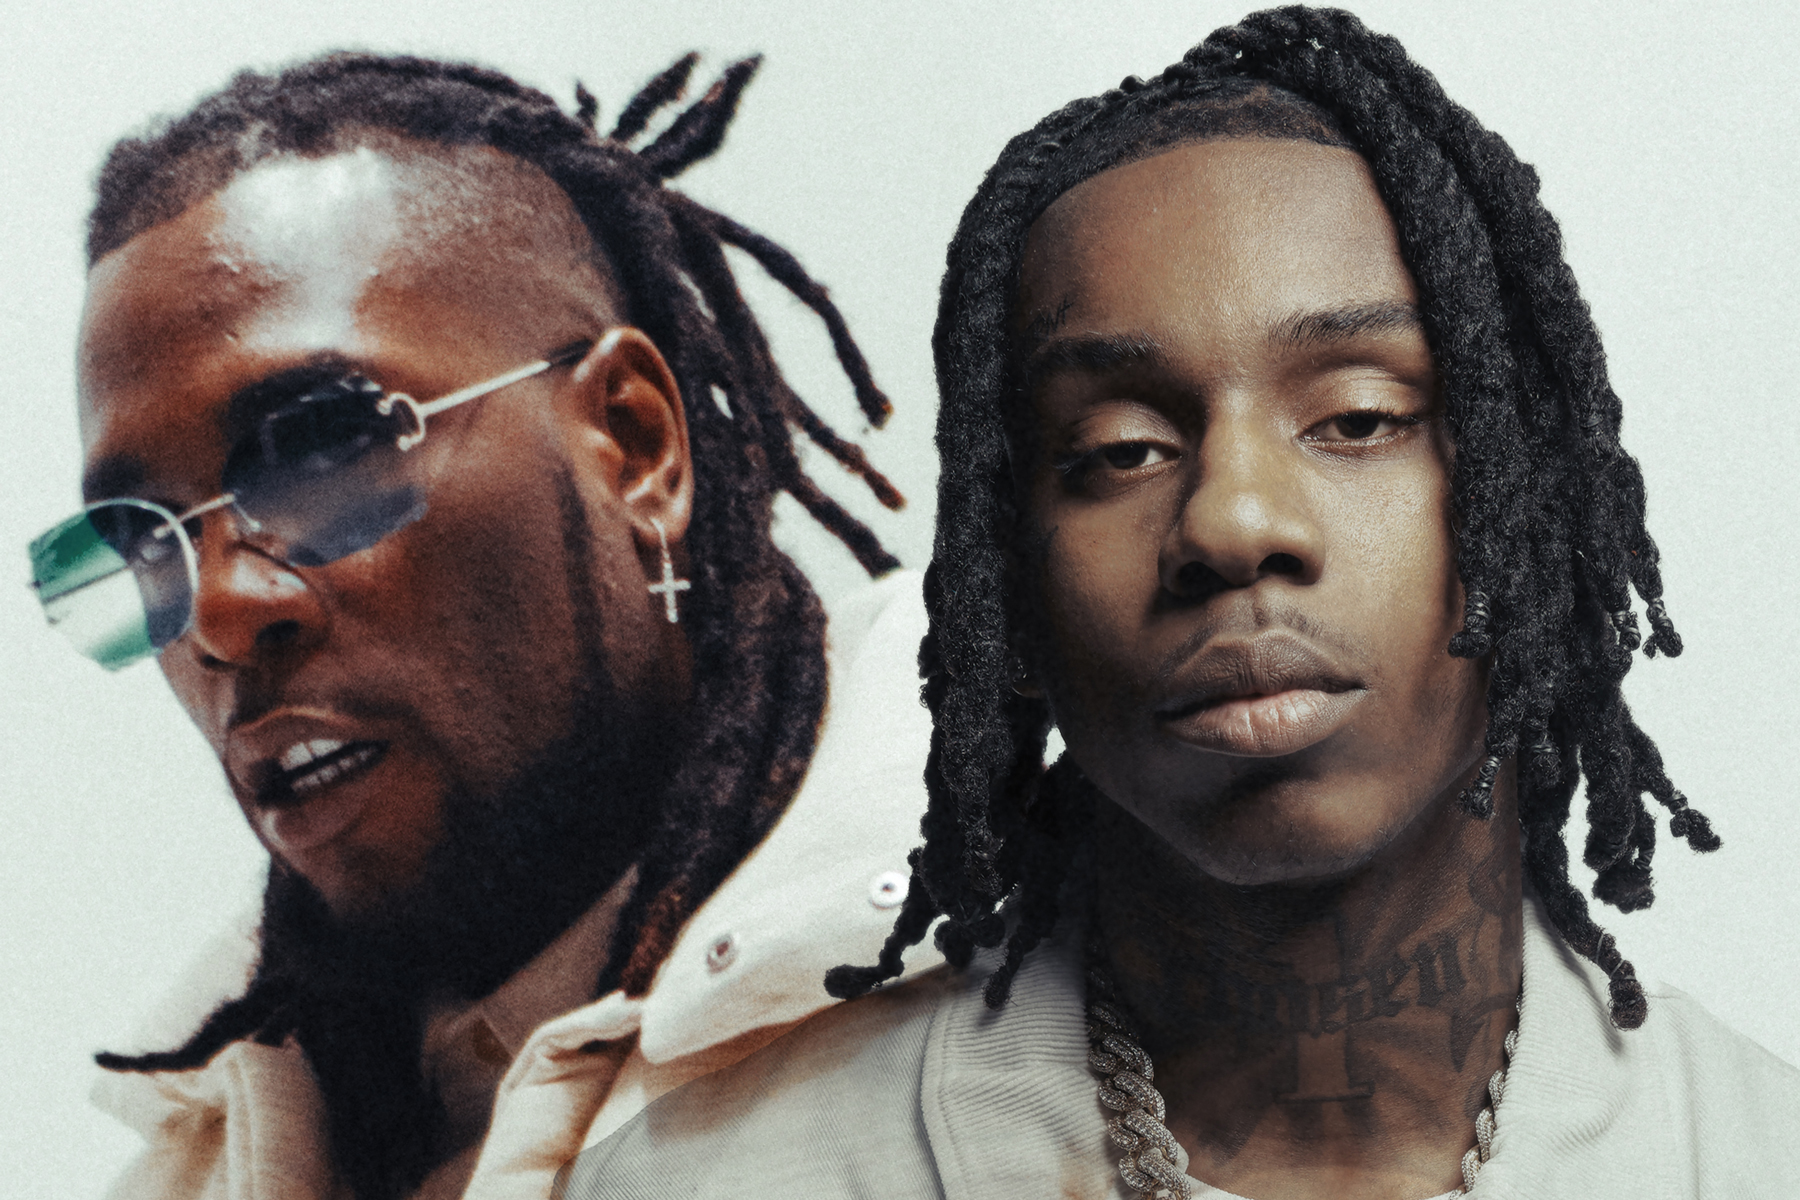 Burna Boy, Polo G Track Strife, and Triumph on “Want It All”